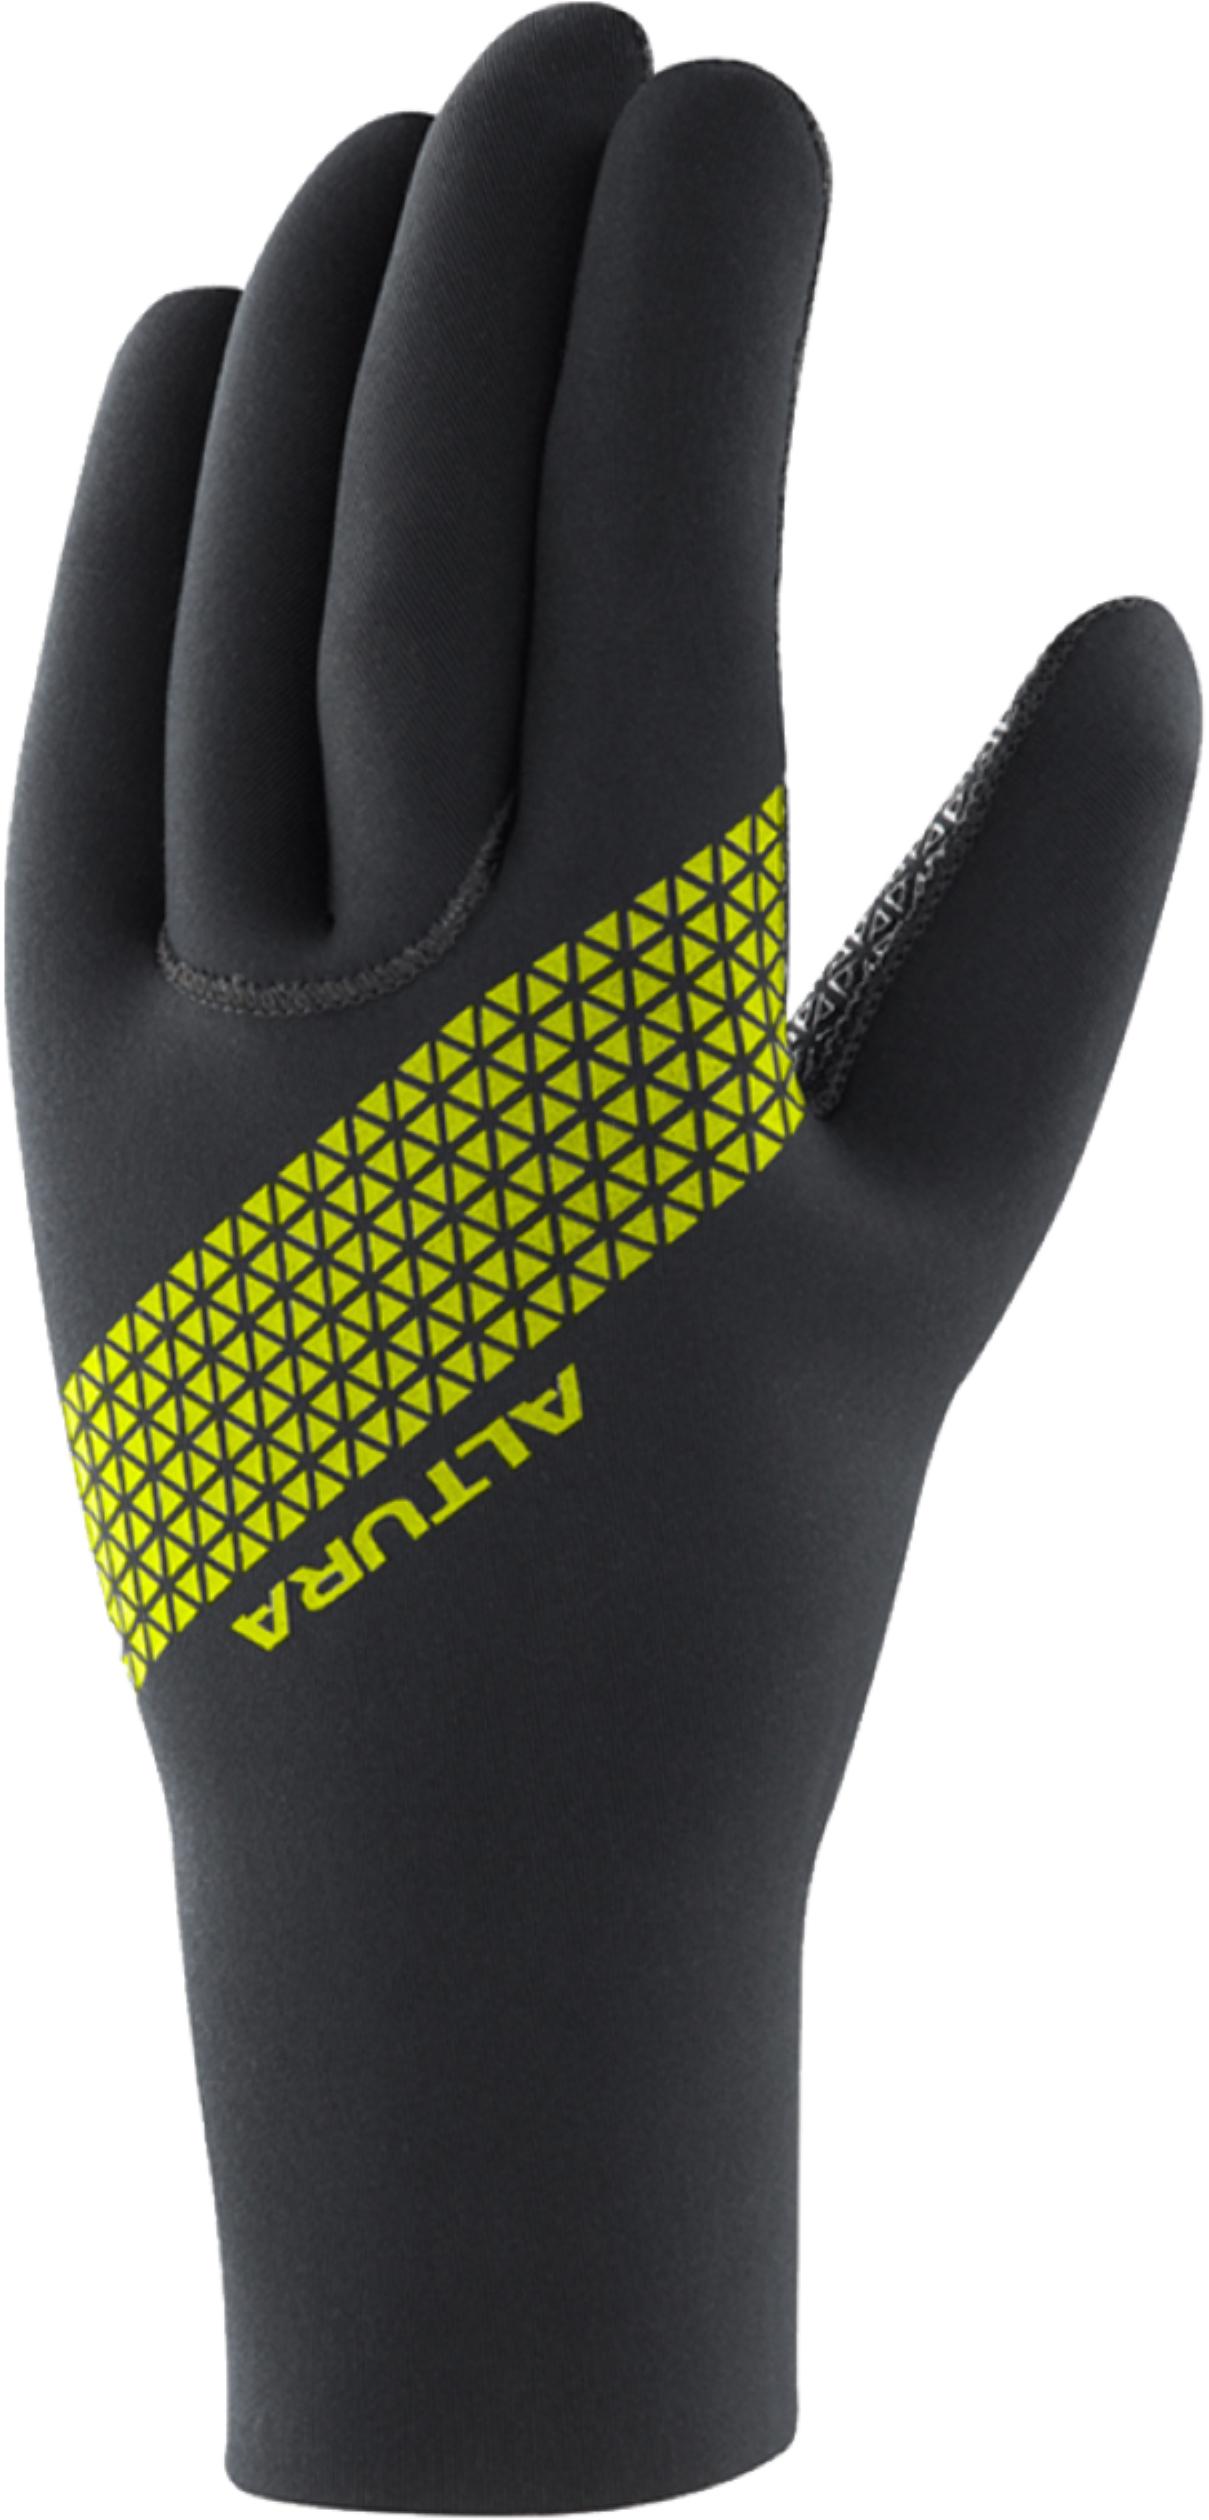 Altura Thermostretch Neoprene Gloves - Black/Yellow - X Large